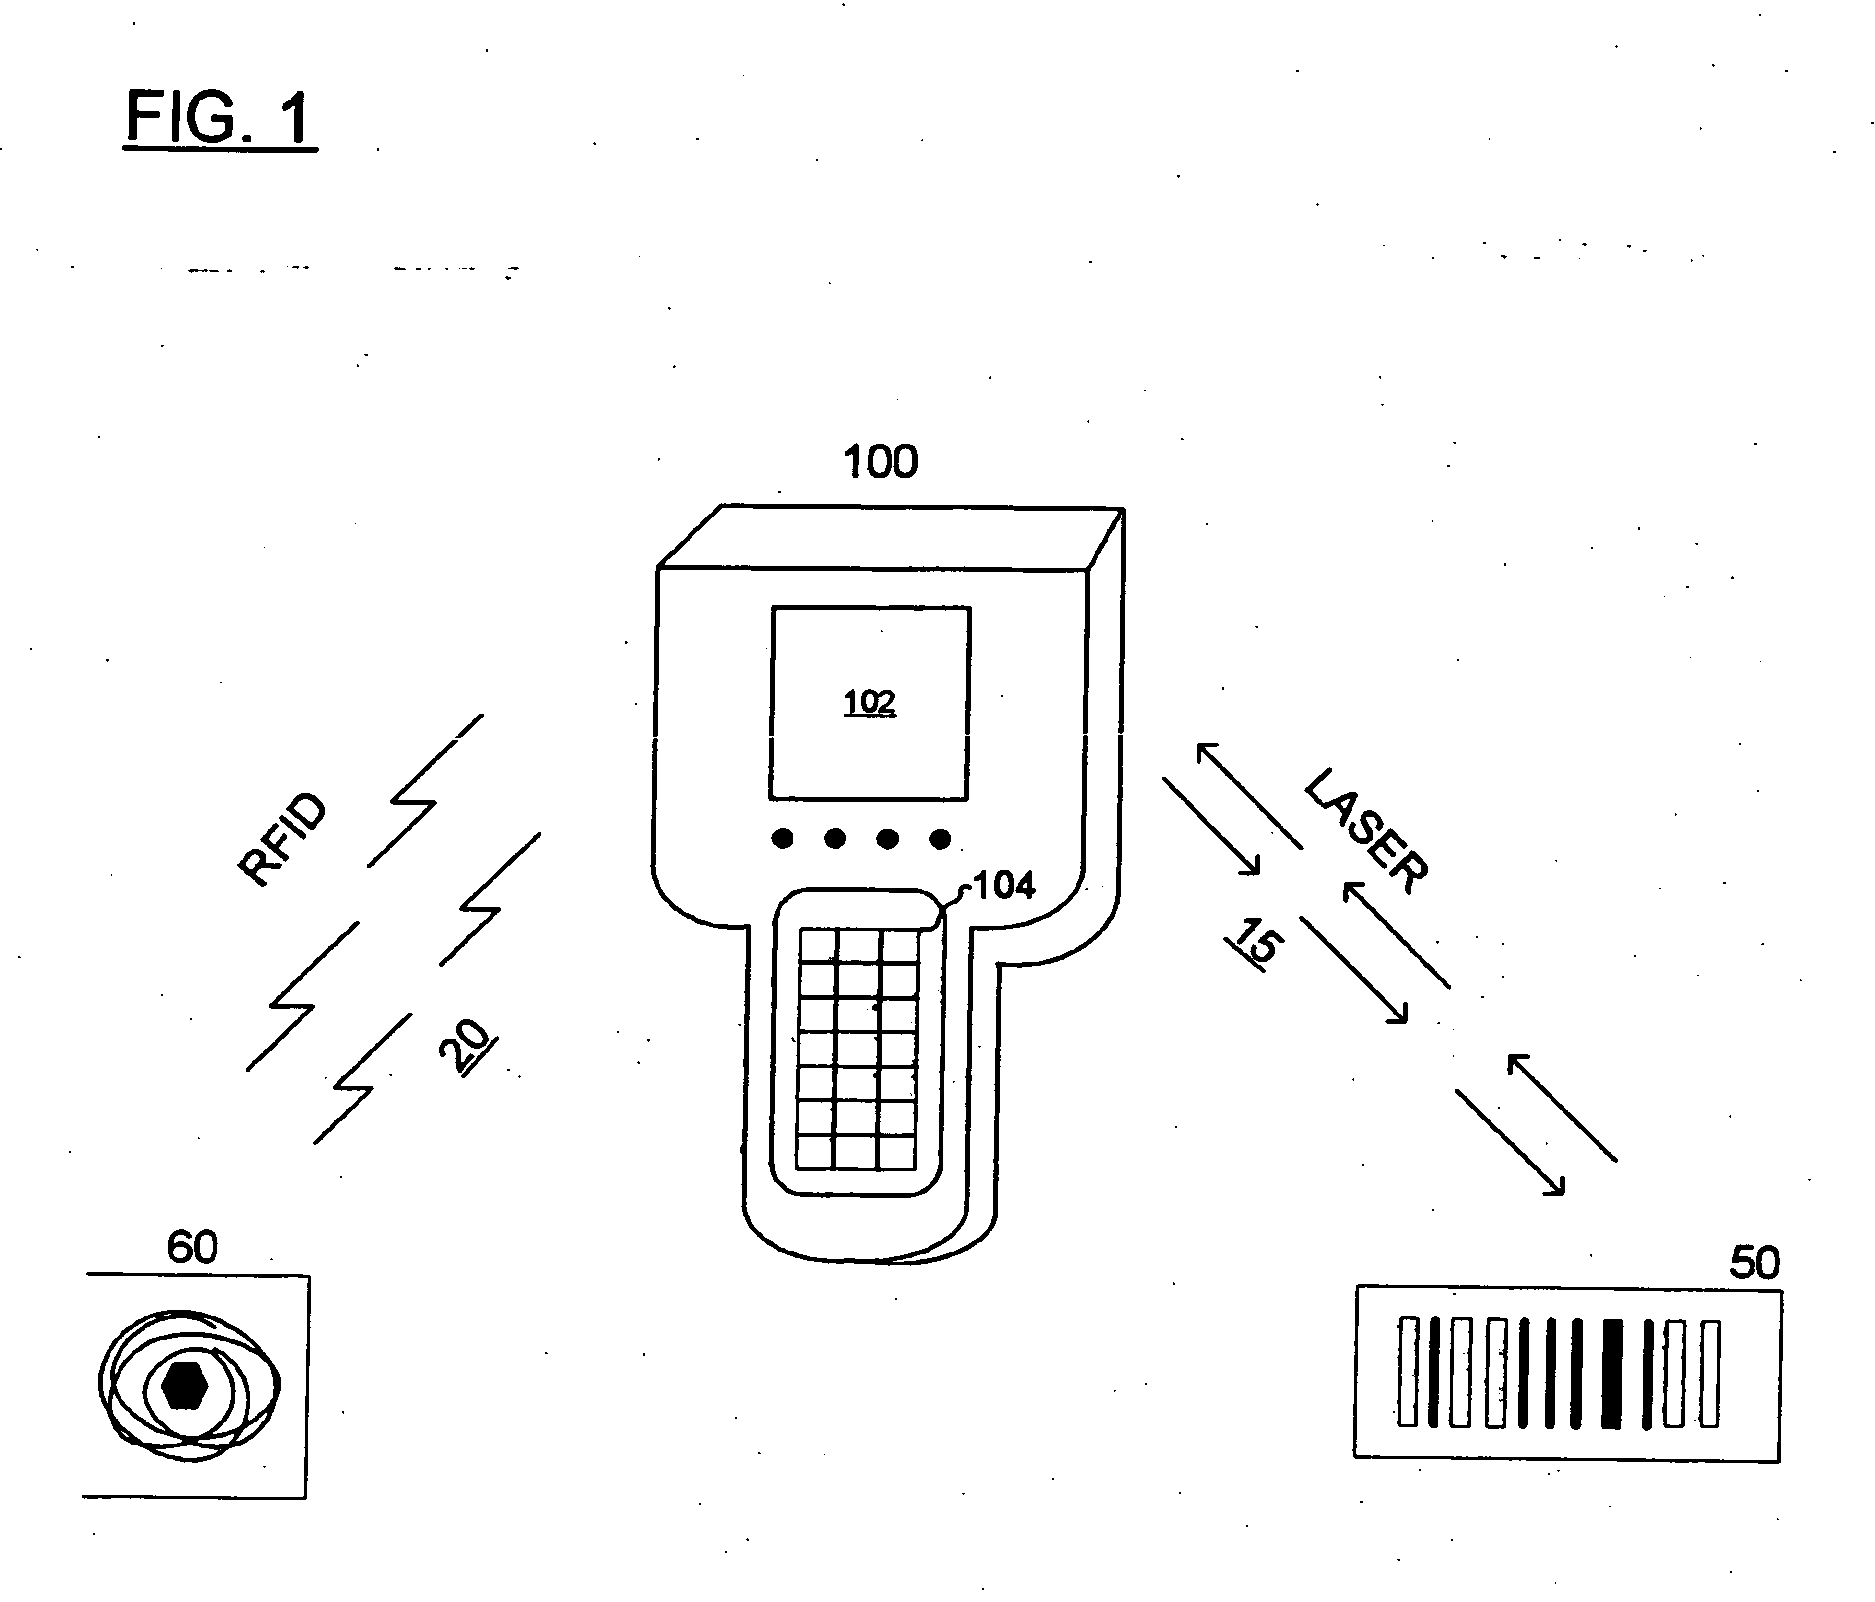 Systems and methods for automated programming of RFID tags using machine readable indicia